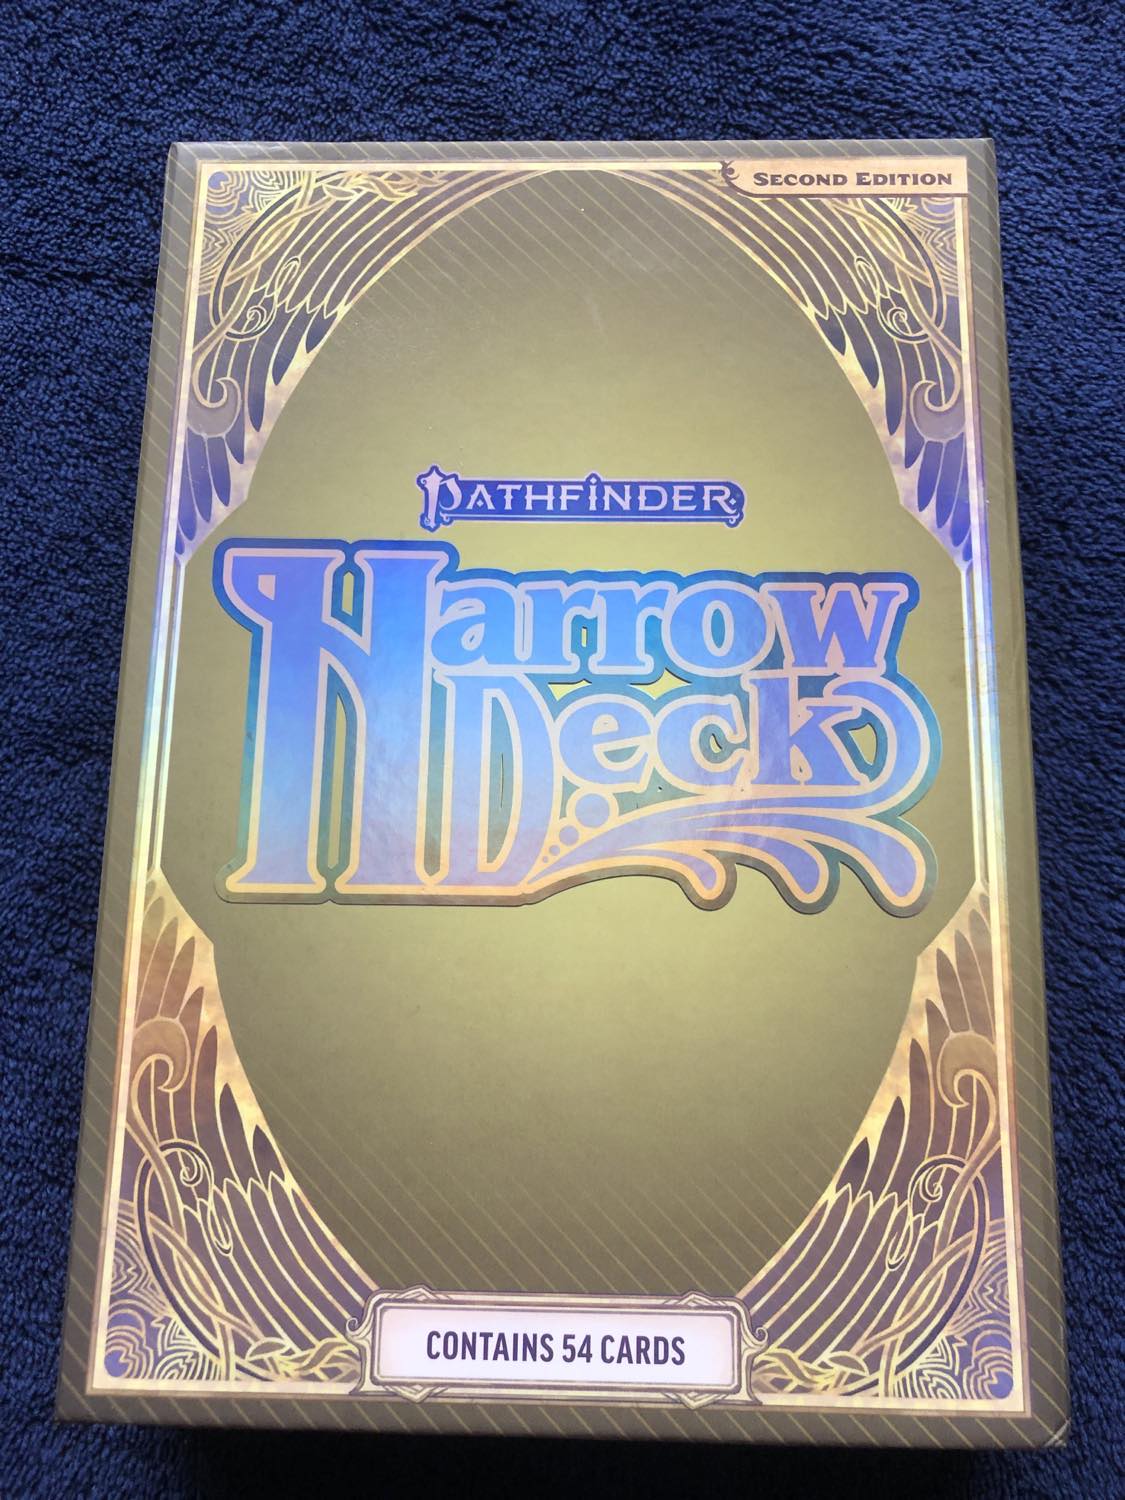 The card box, in shiny gold with purple lettering. The box like the cards in 2e have a wing-like surround to the images, and is much larger than the cards themselves. The cards inside are held in the center with cardboard borders, and the instruction manual is the size of the box itself, which is in the next pic.